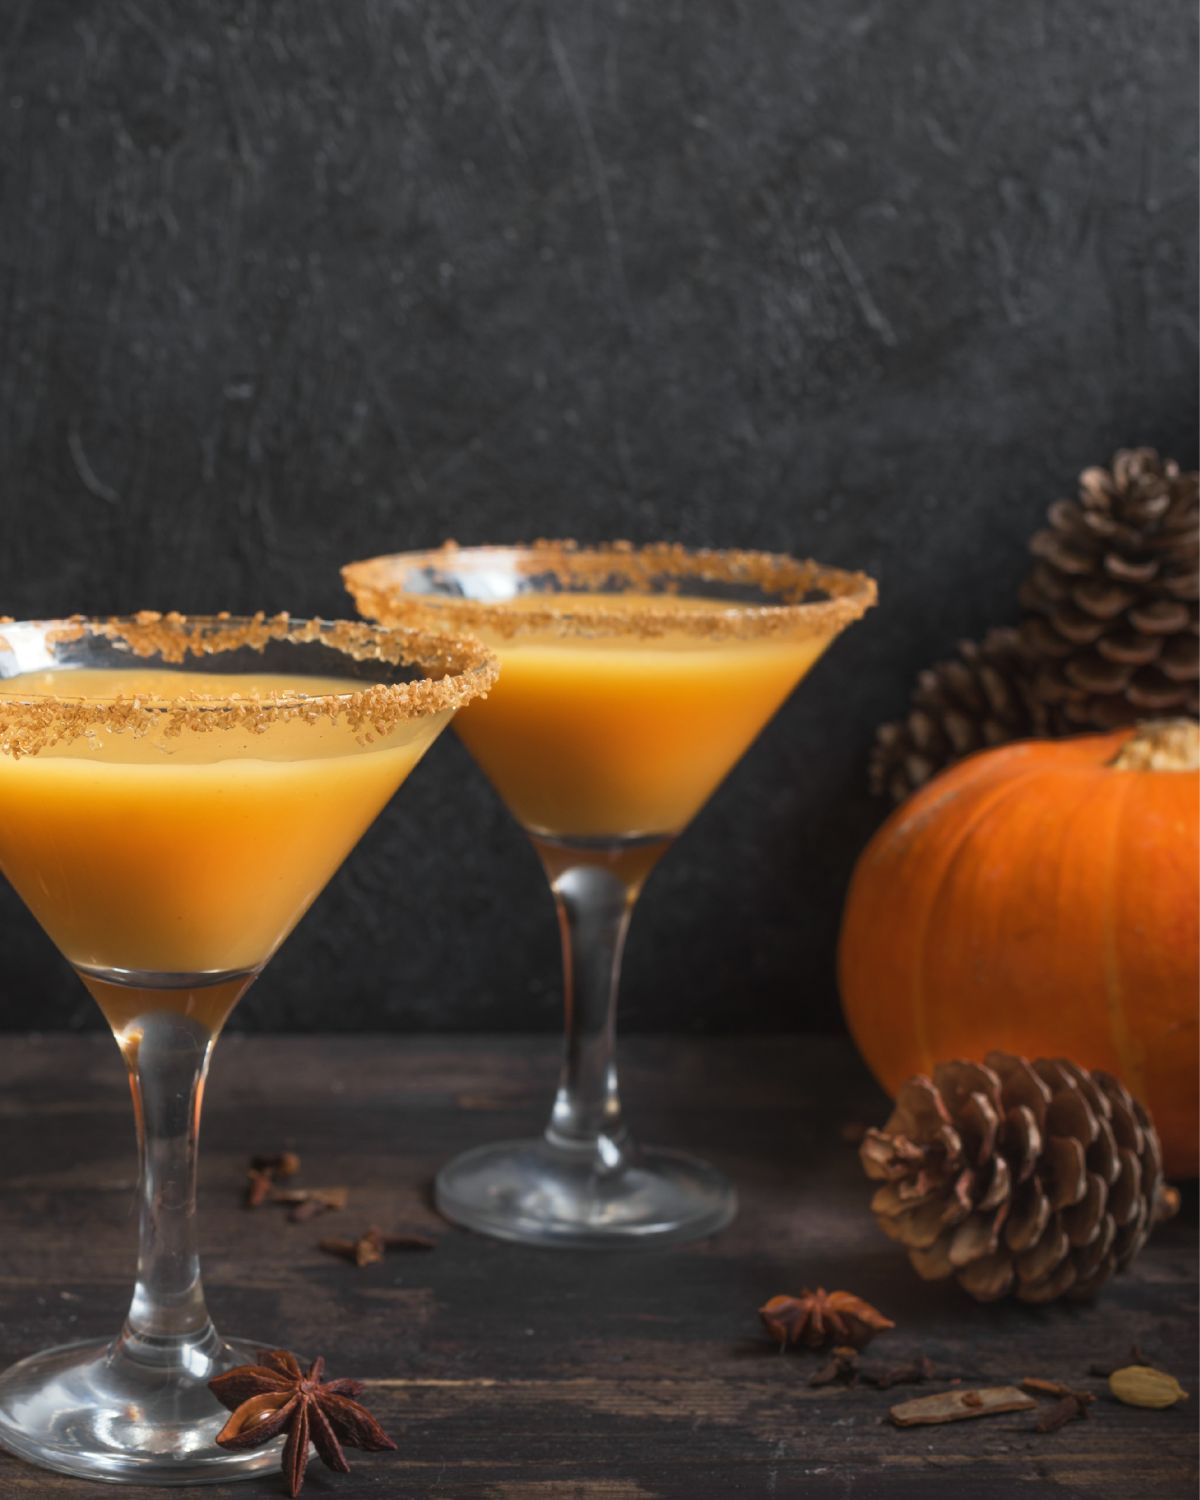 A cocktail made with the pumpkin moonshine.